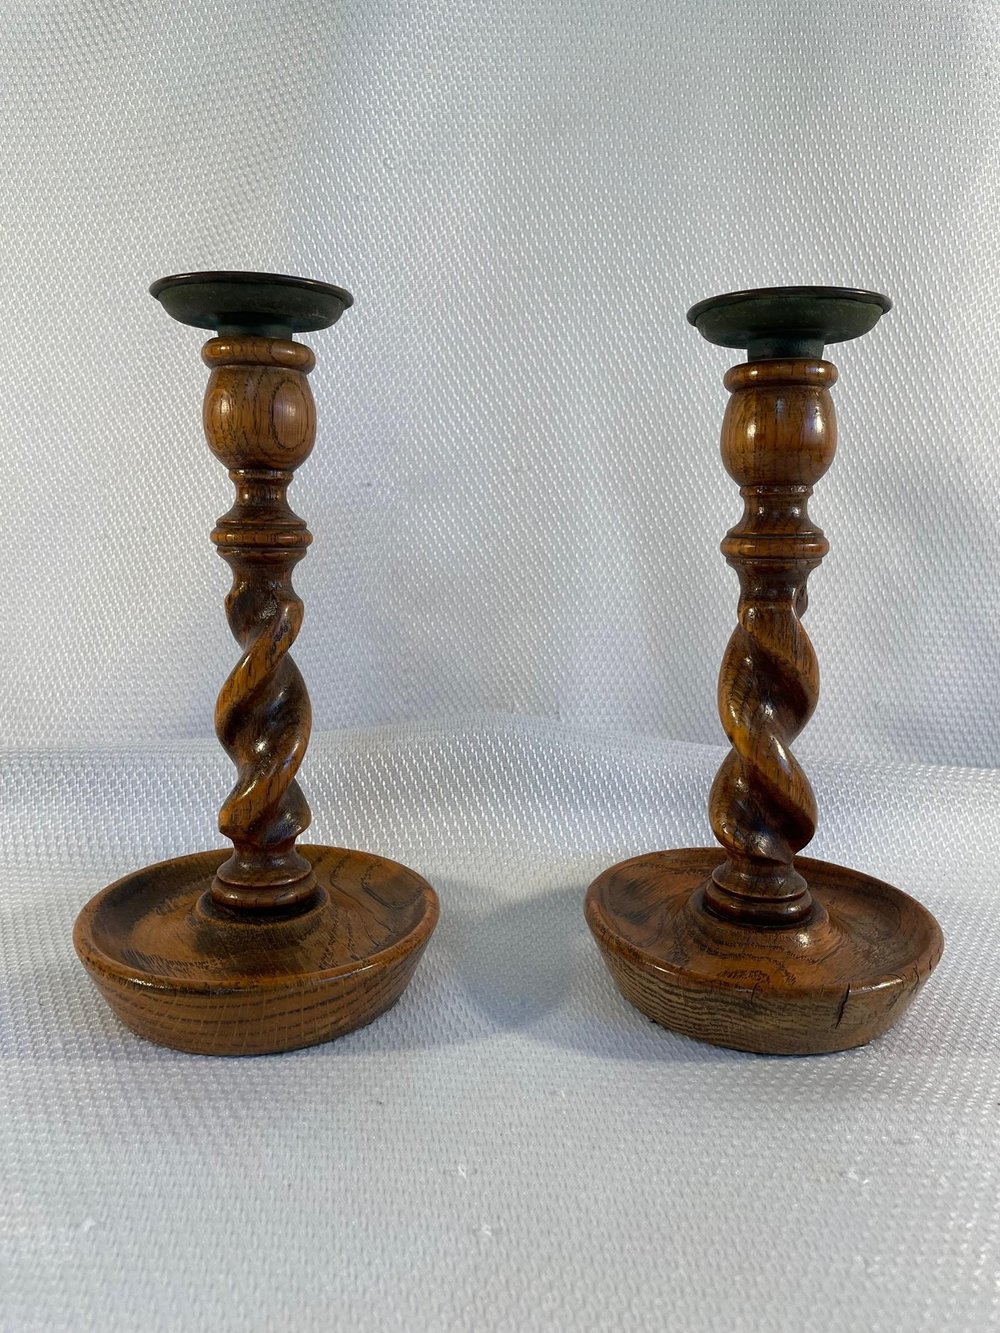 English Carved Wood Barley Twist Candlesticks With Brass Candle Cups - a  Pair/ Sold